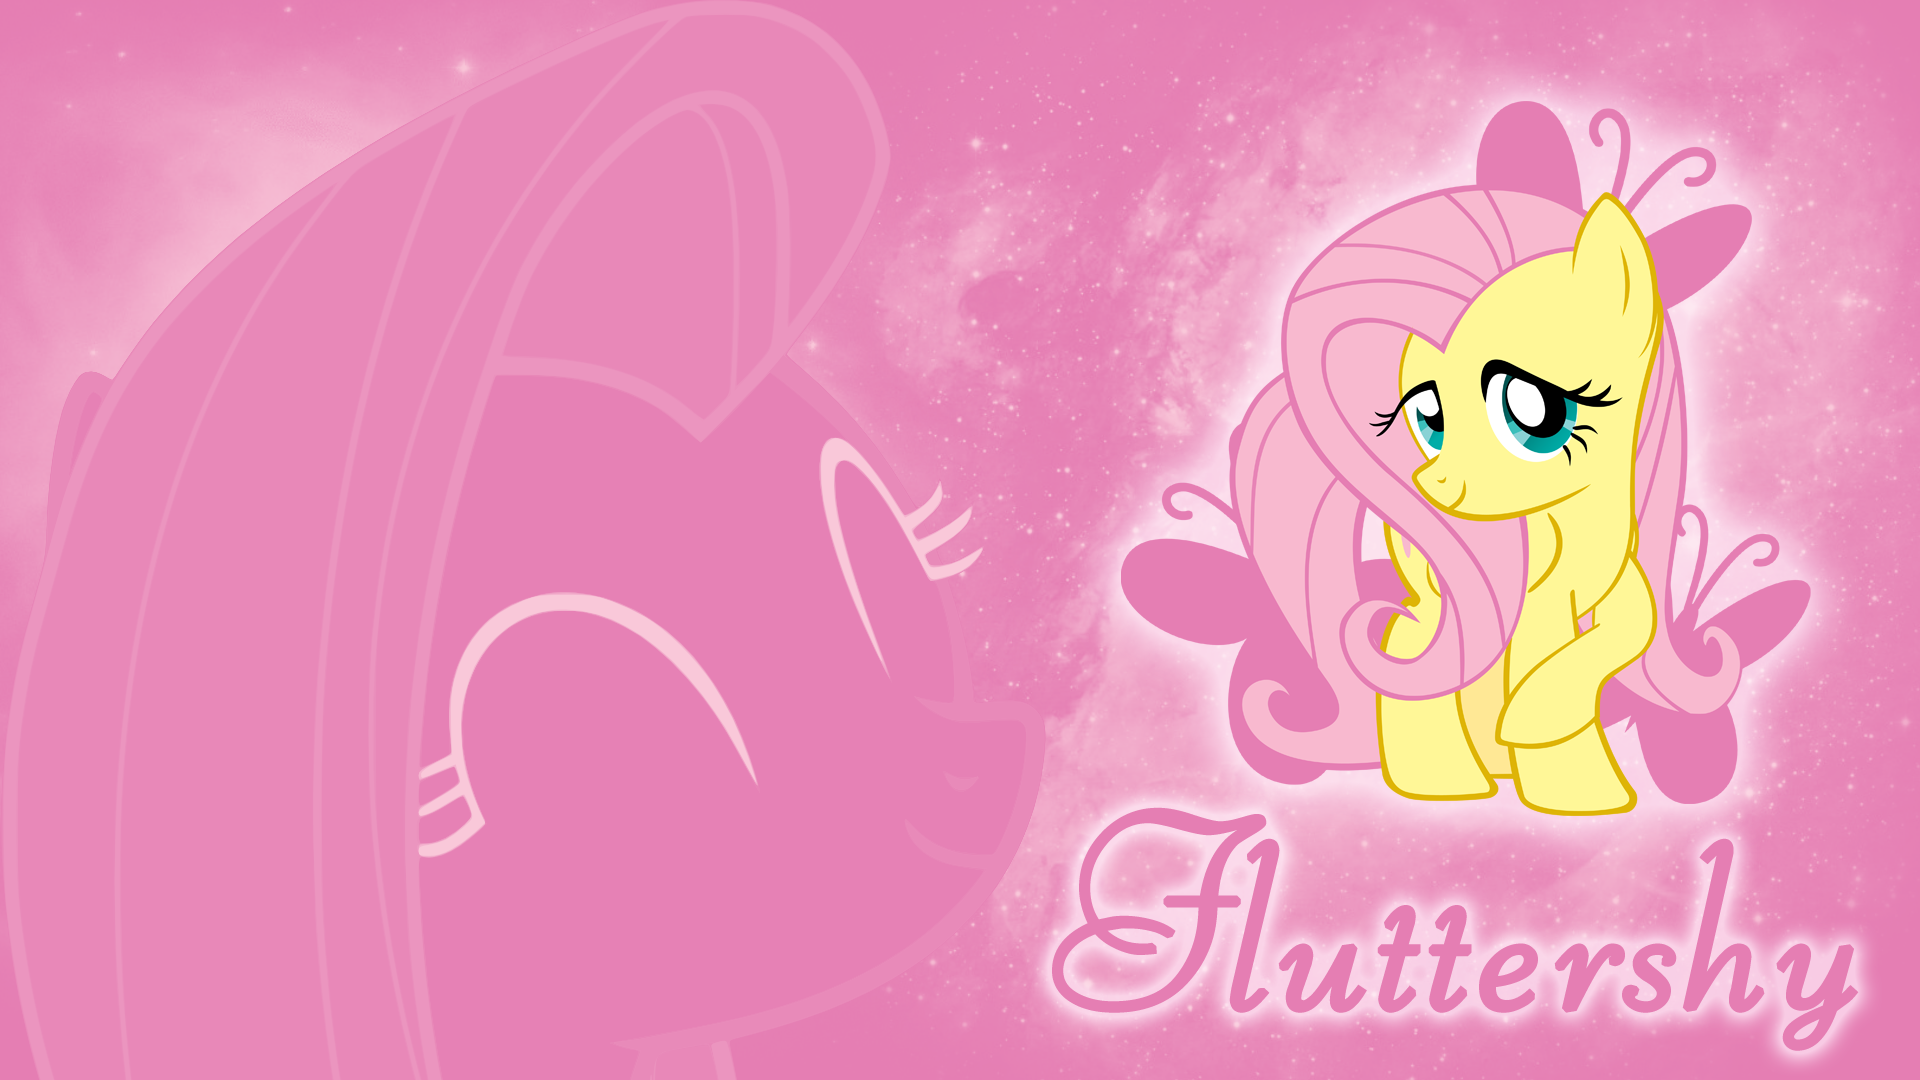 Shyness is Kindness - Fluttershy Wallpaper by cradet